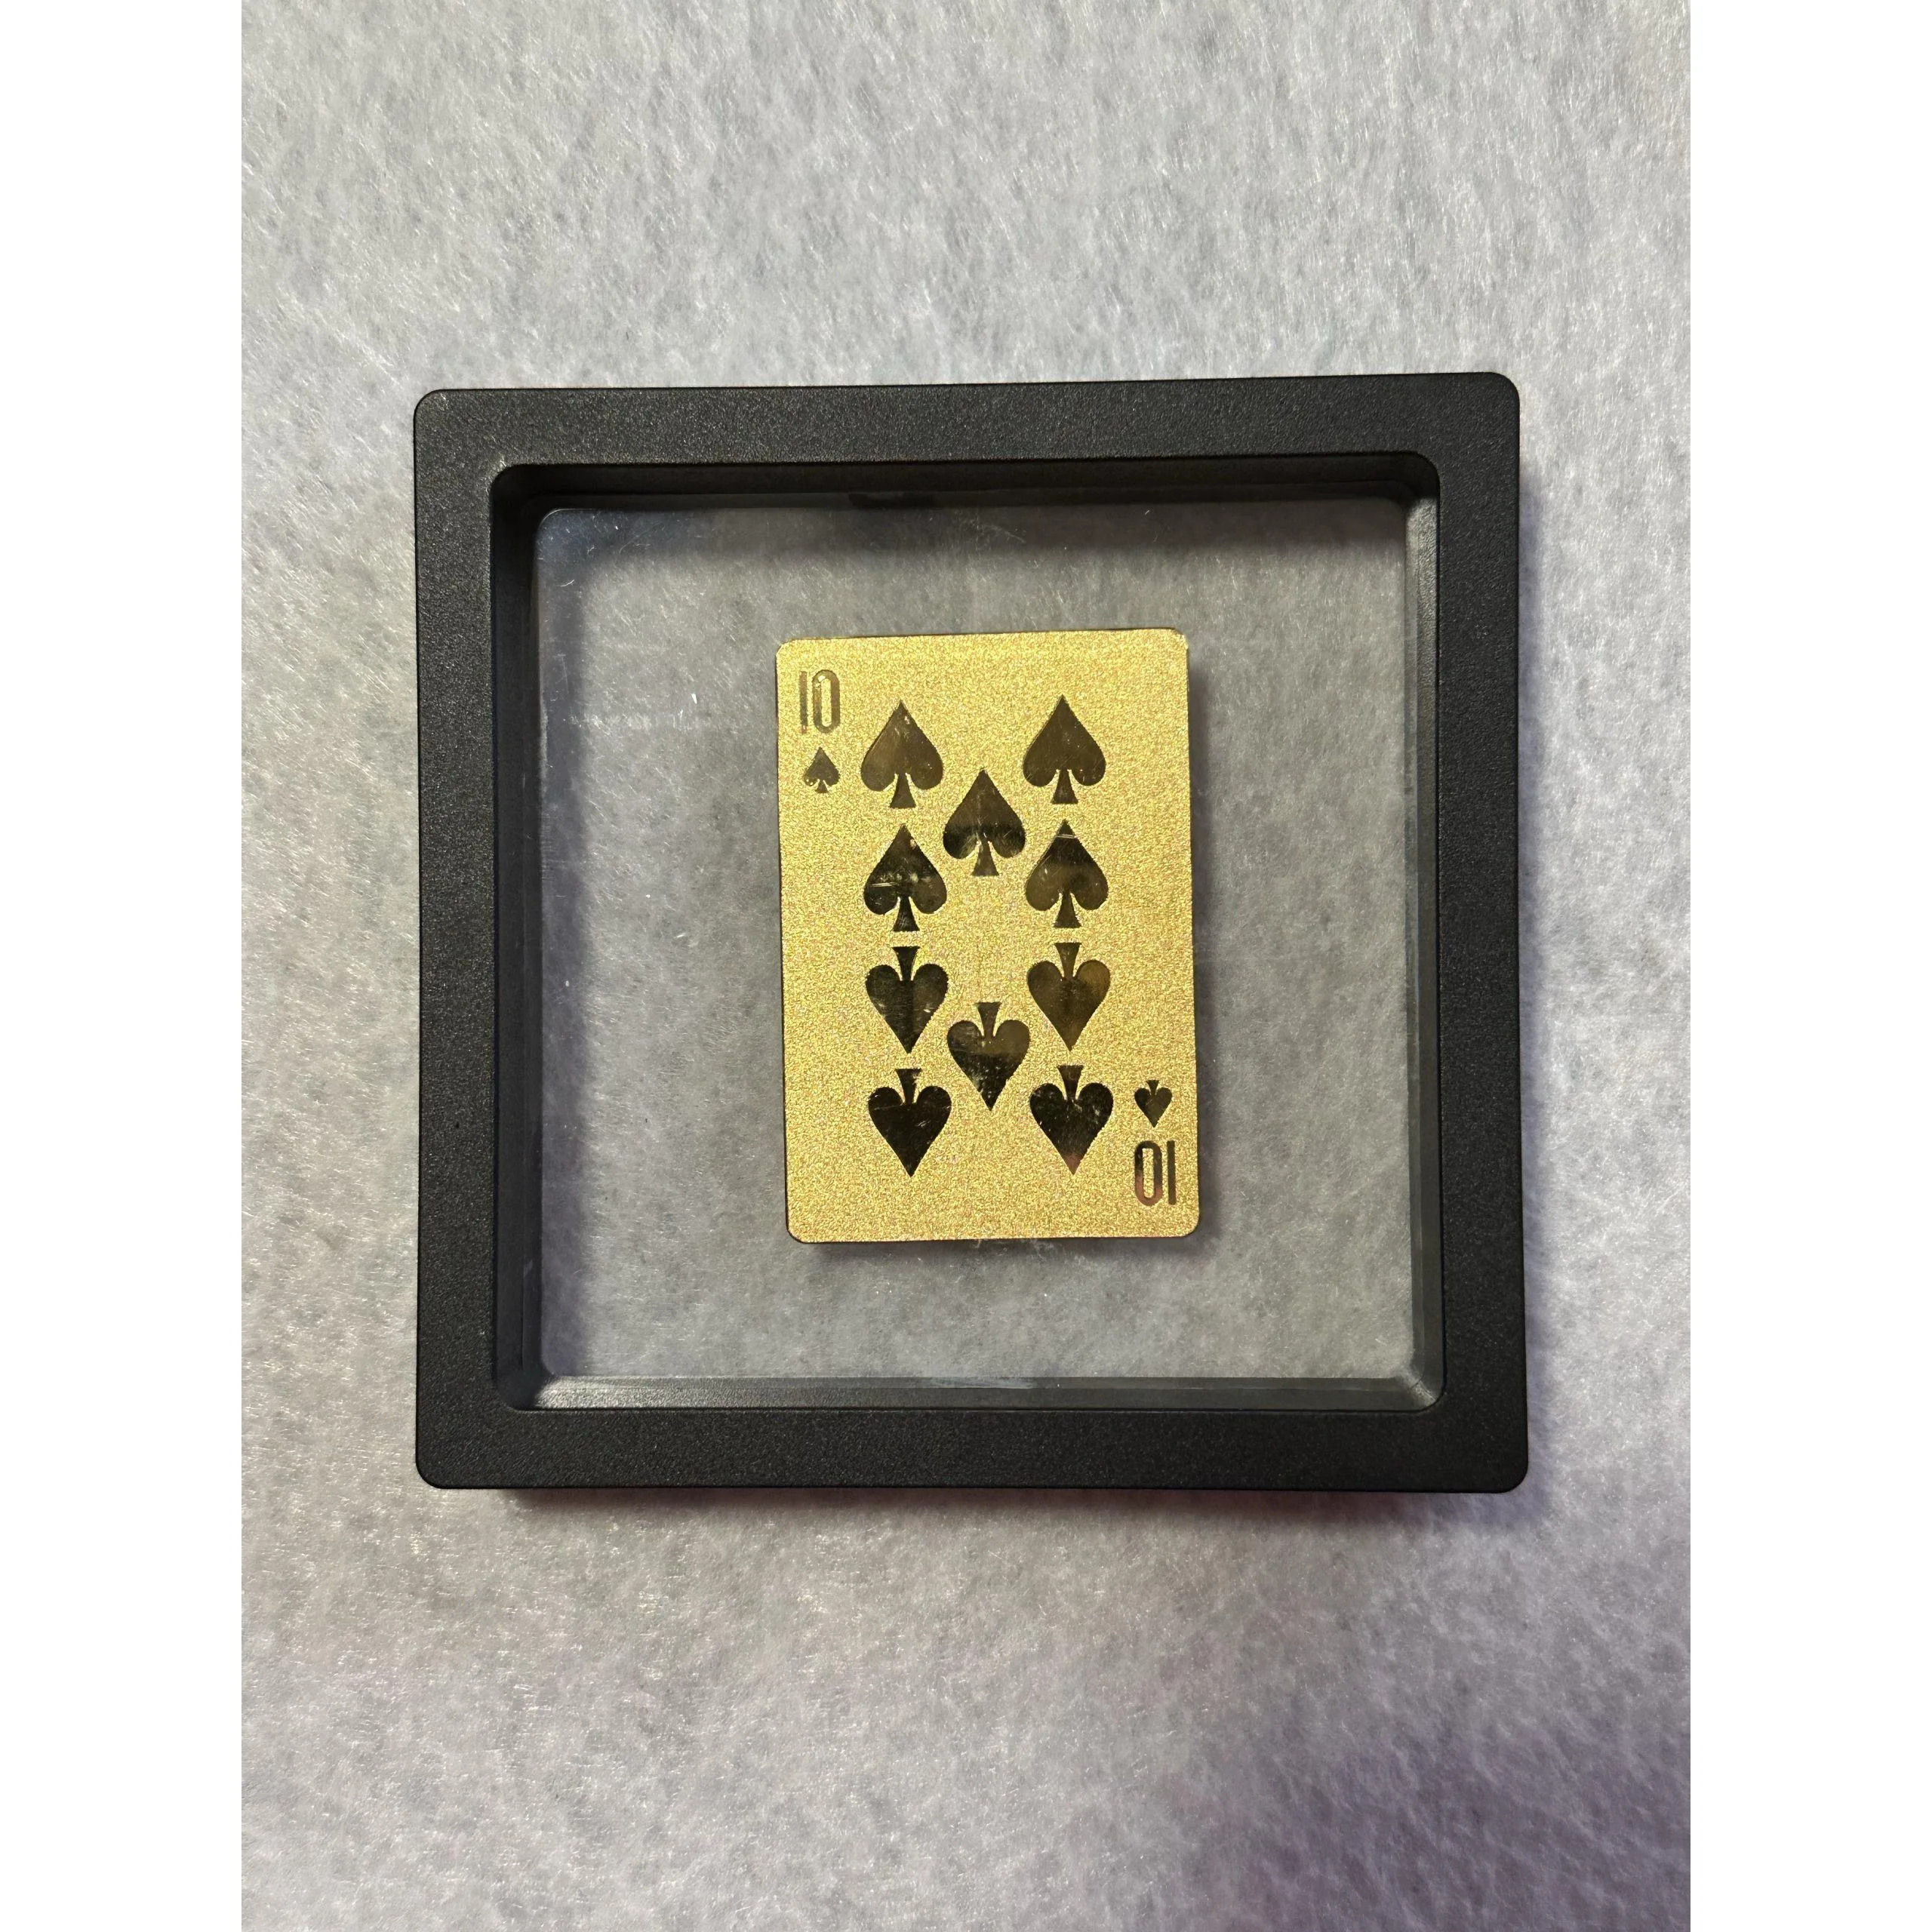 24k gold playing card, One of a kind Prehistoric Online